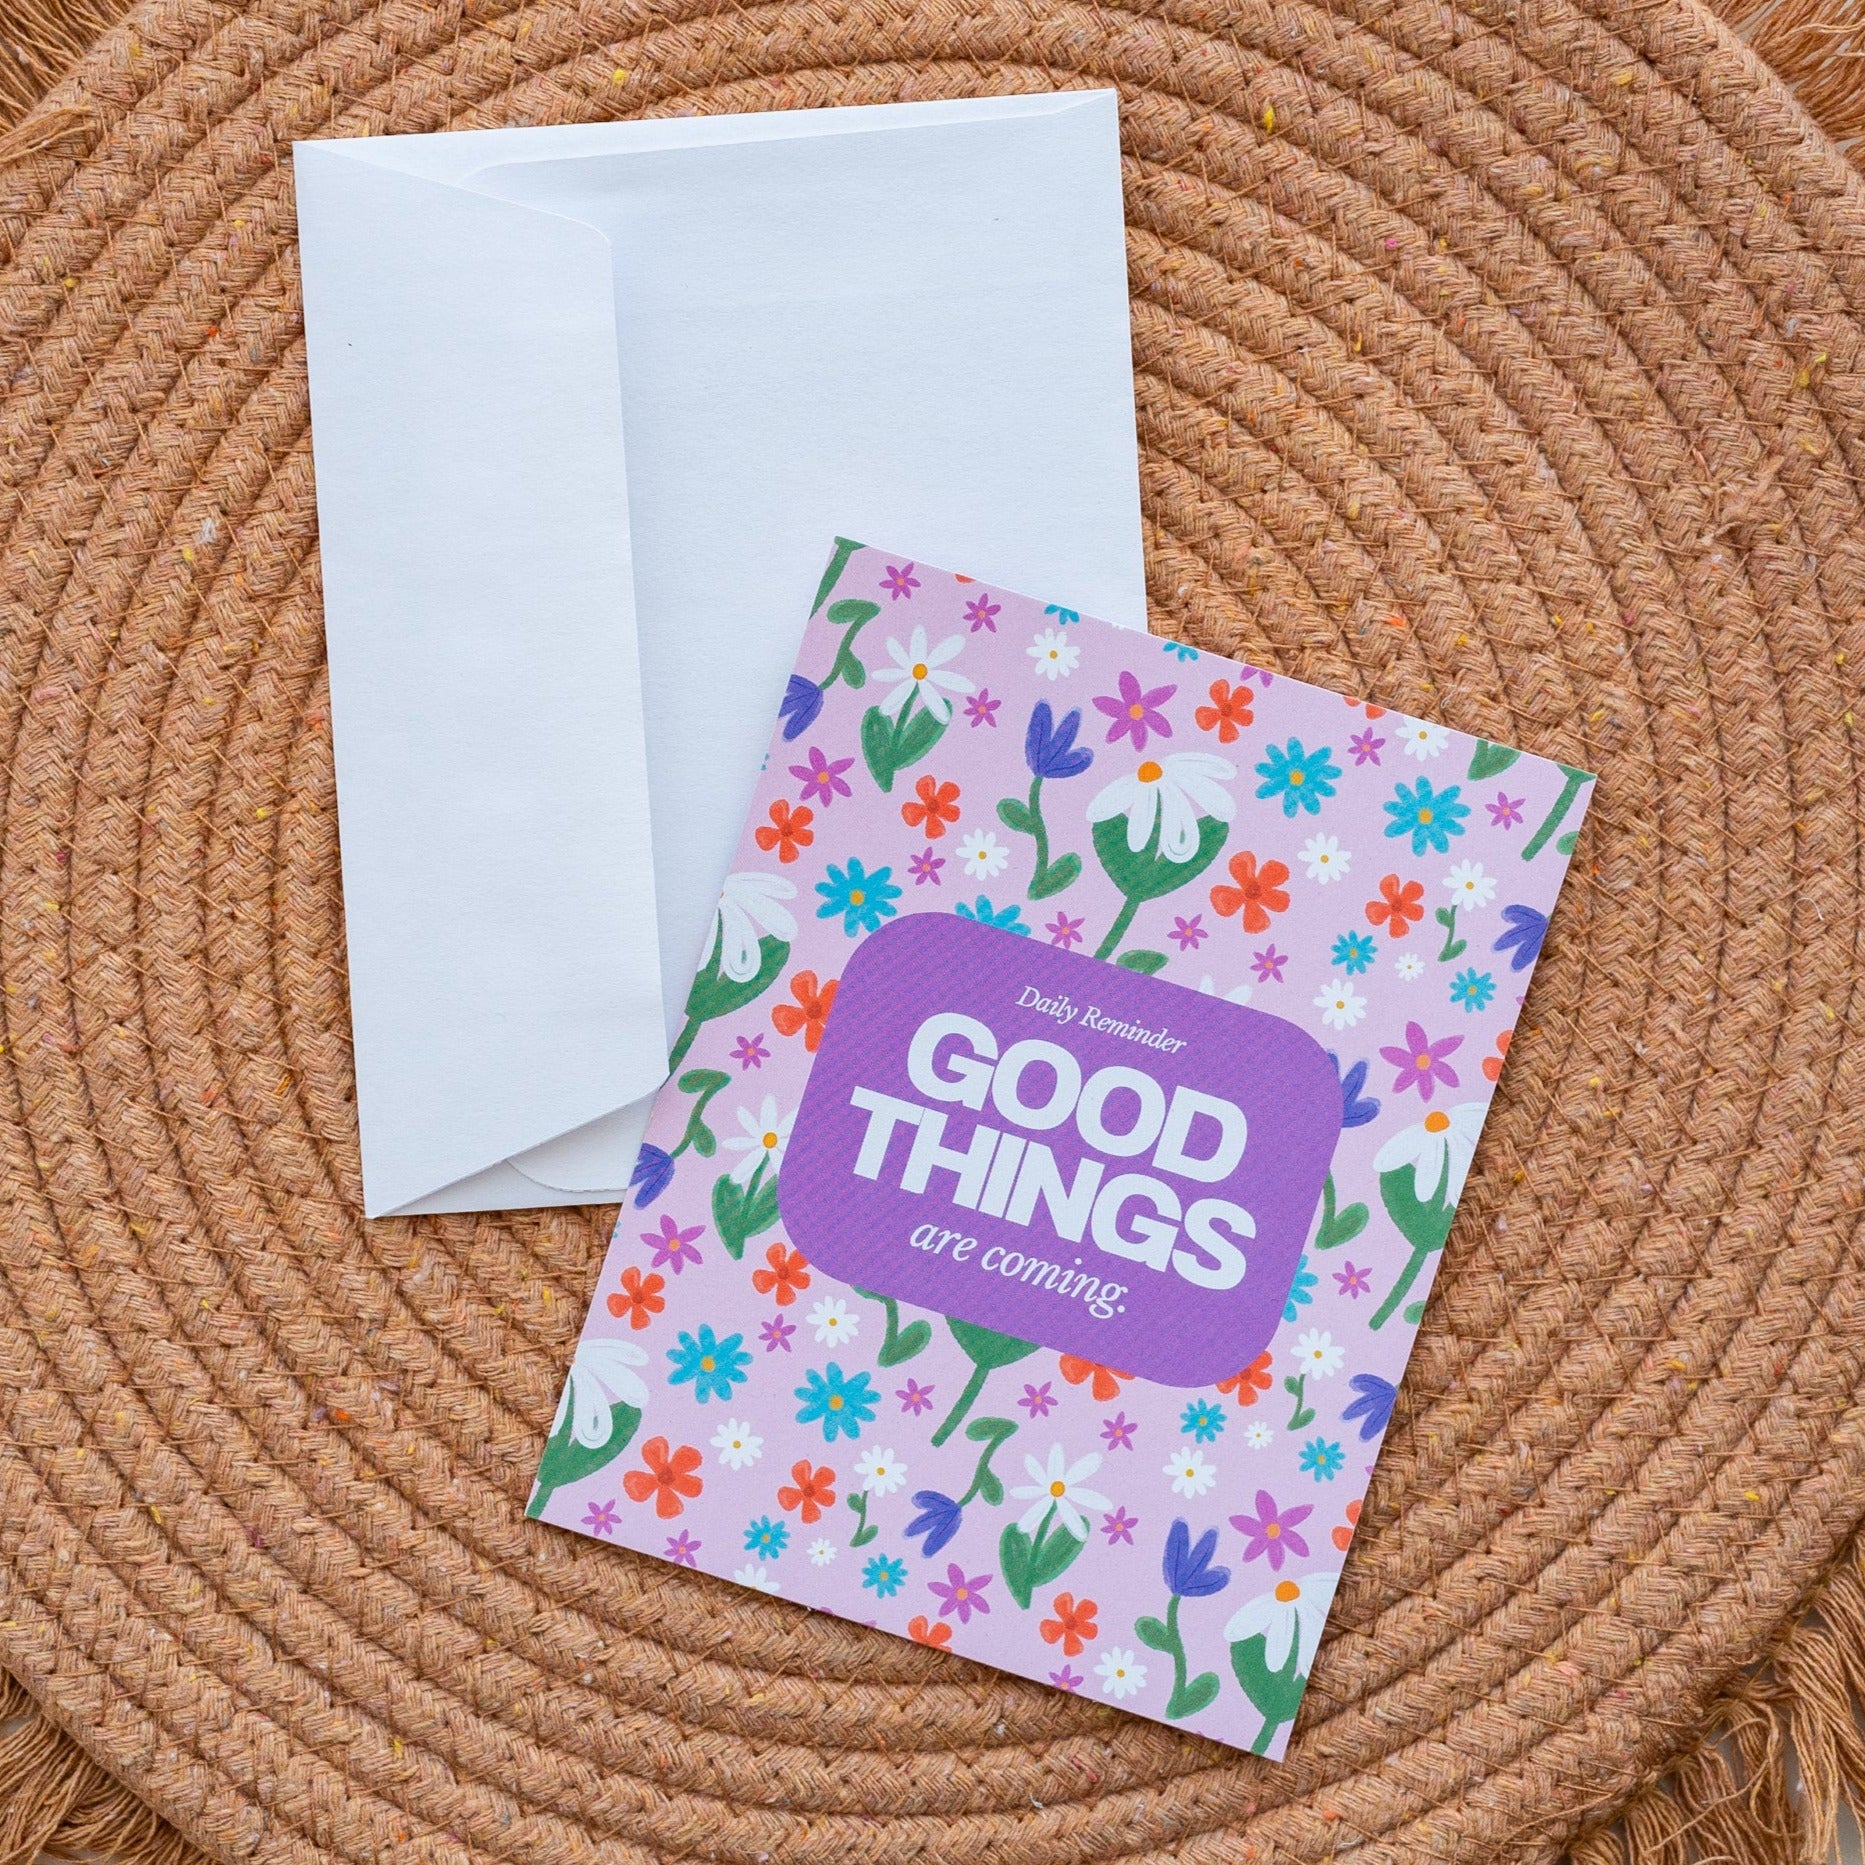 Good Things are Coming - Greeting Card